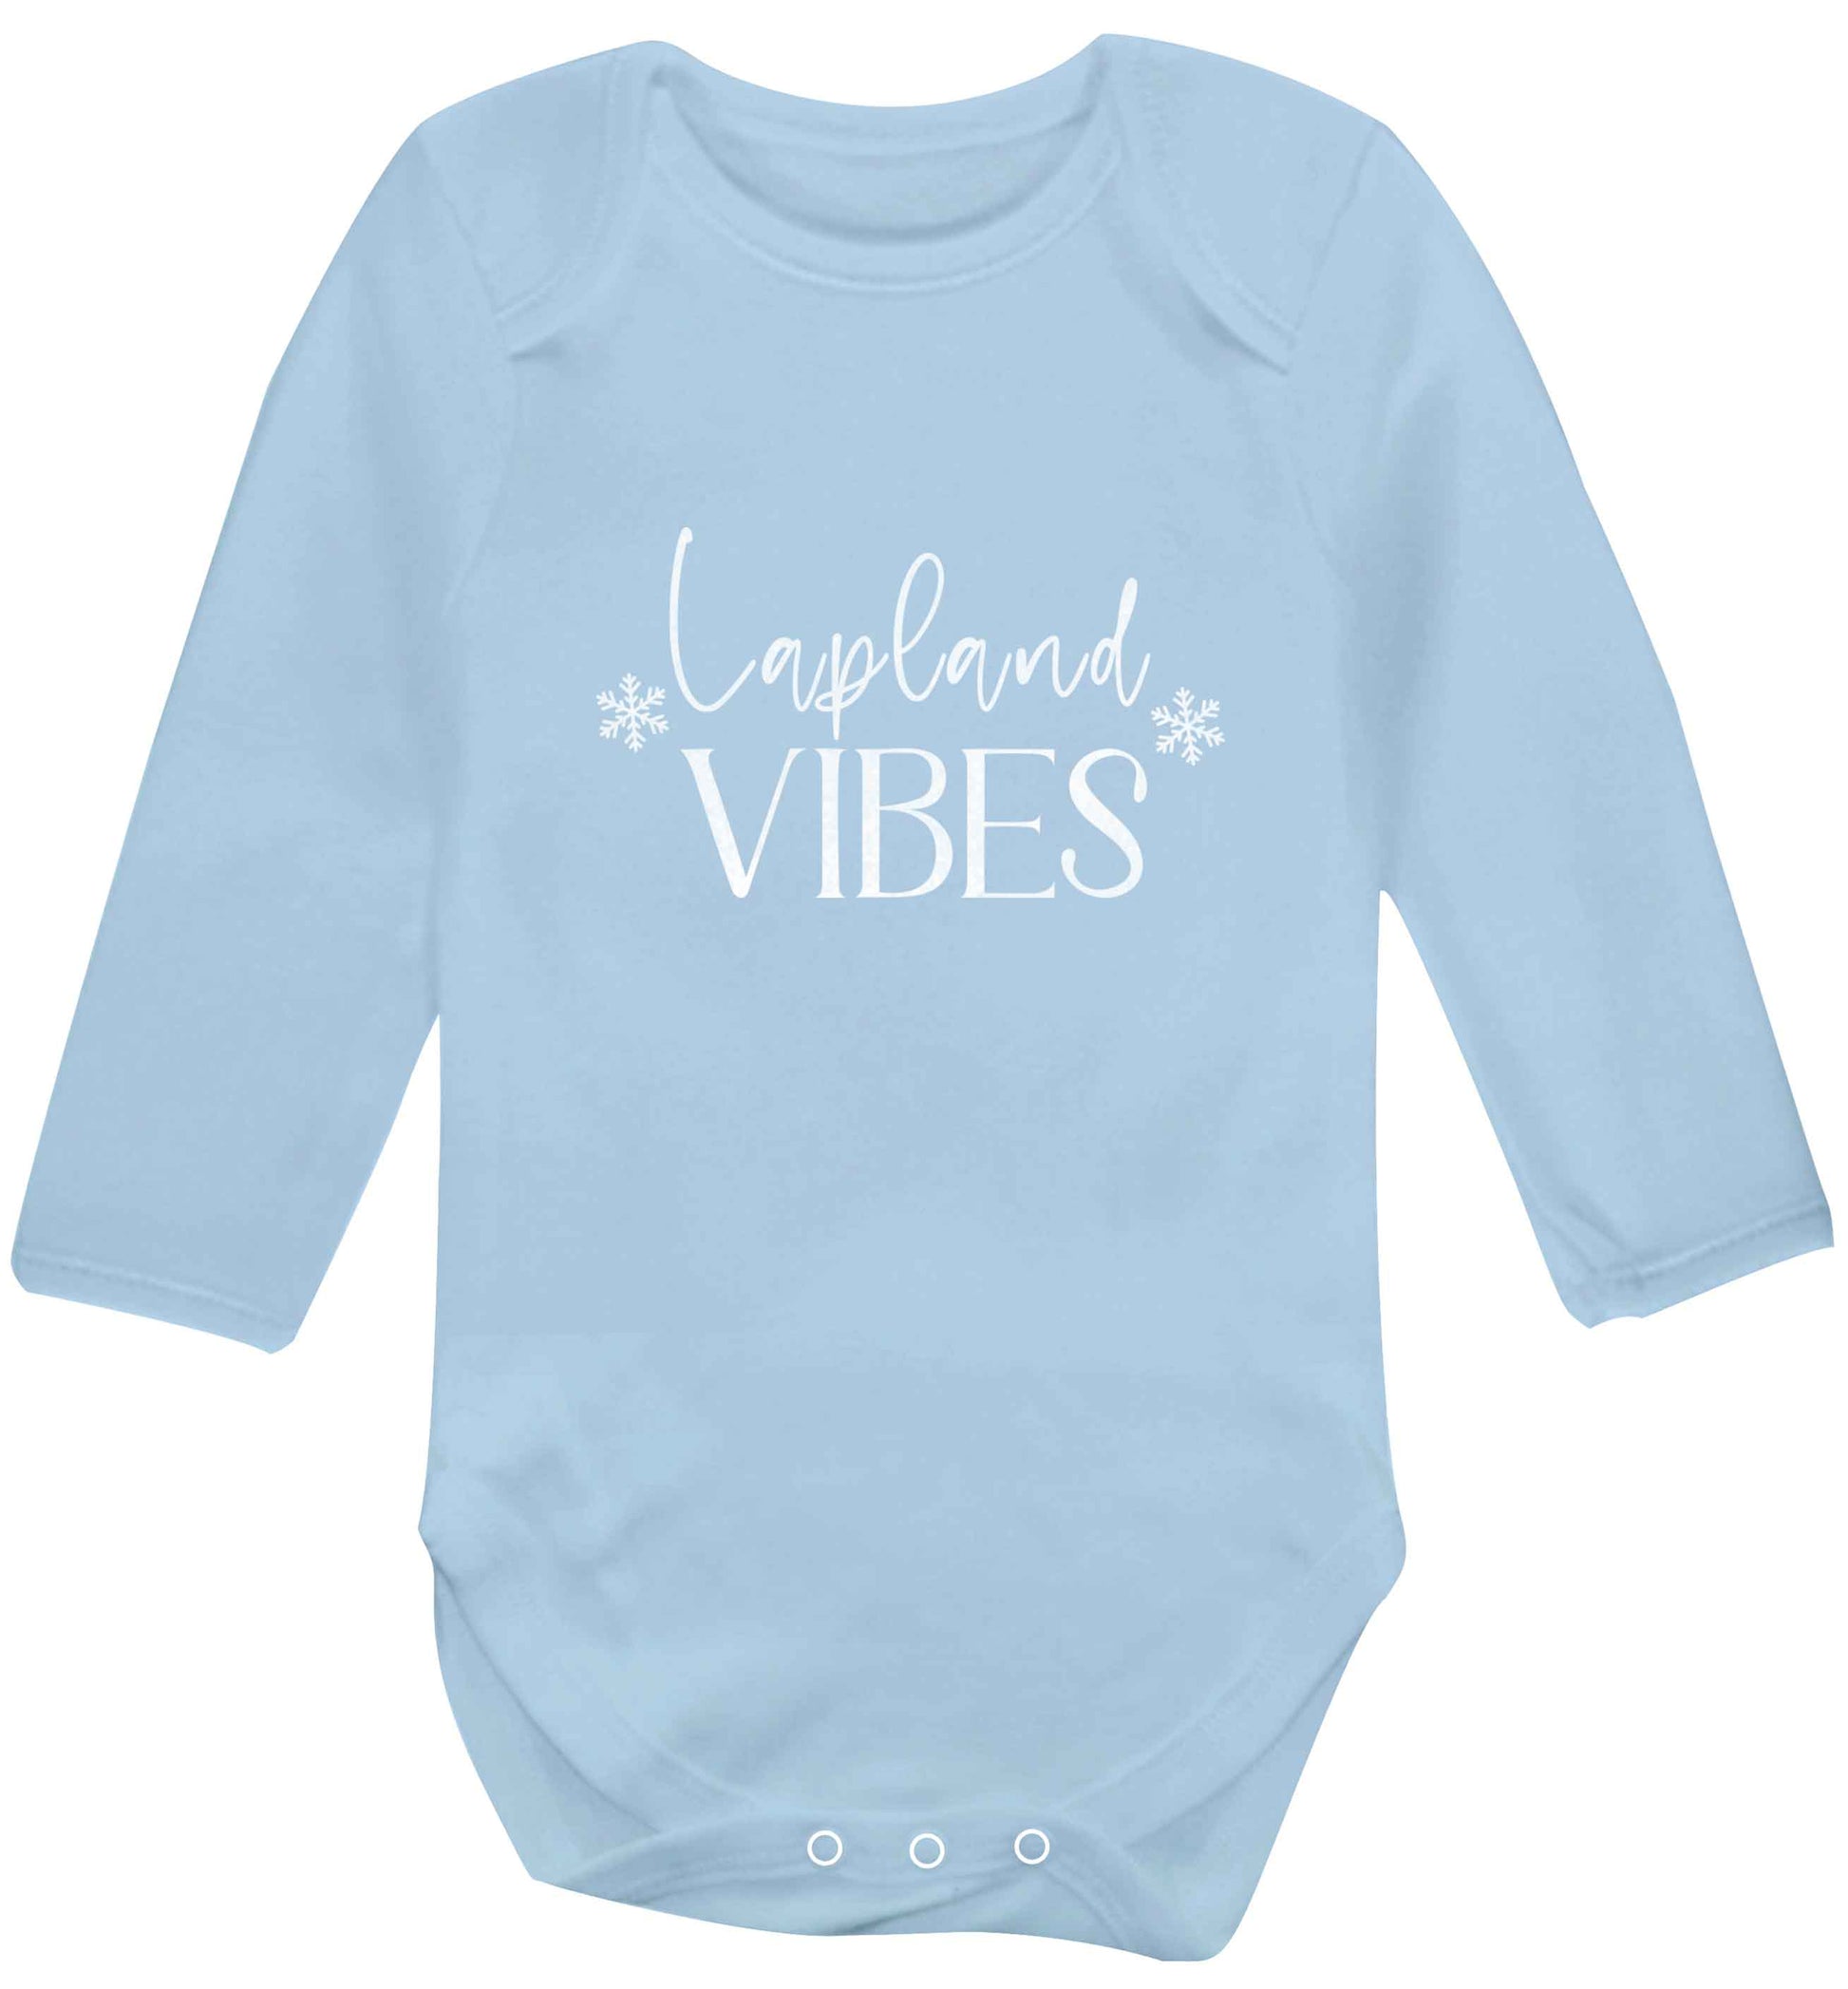 Lapland vibes baby vest long sleeved pale blue 6-12 months